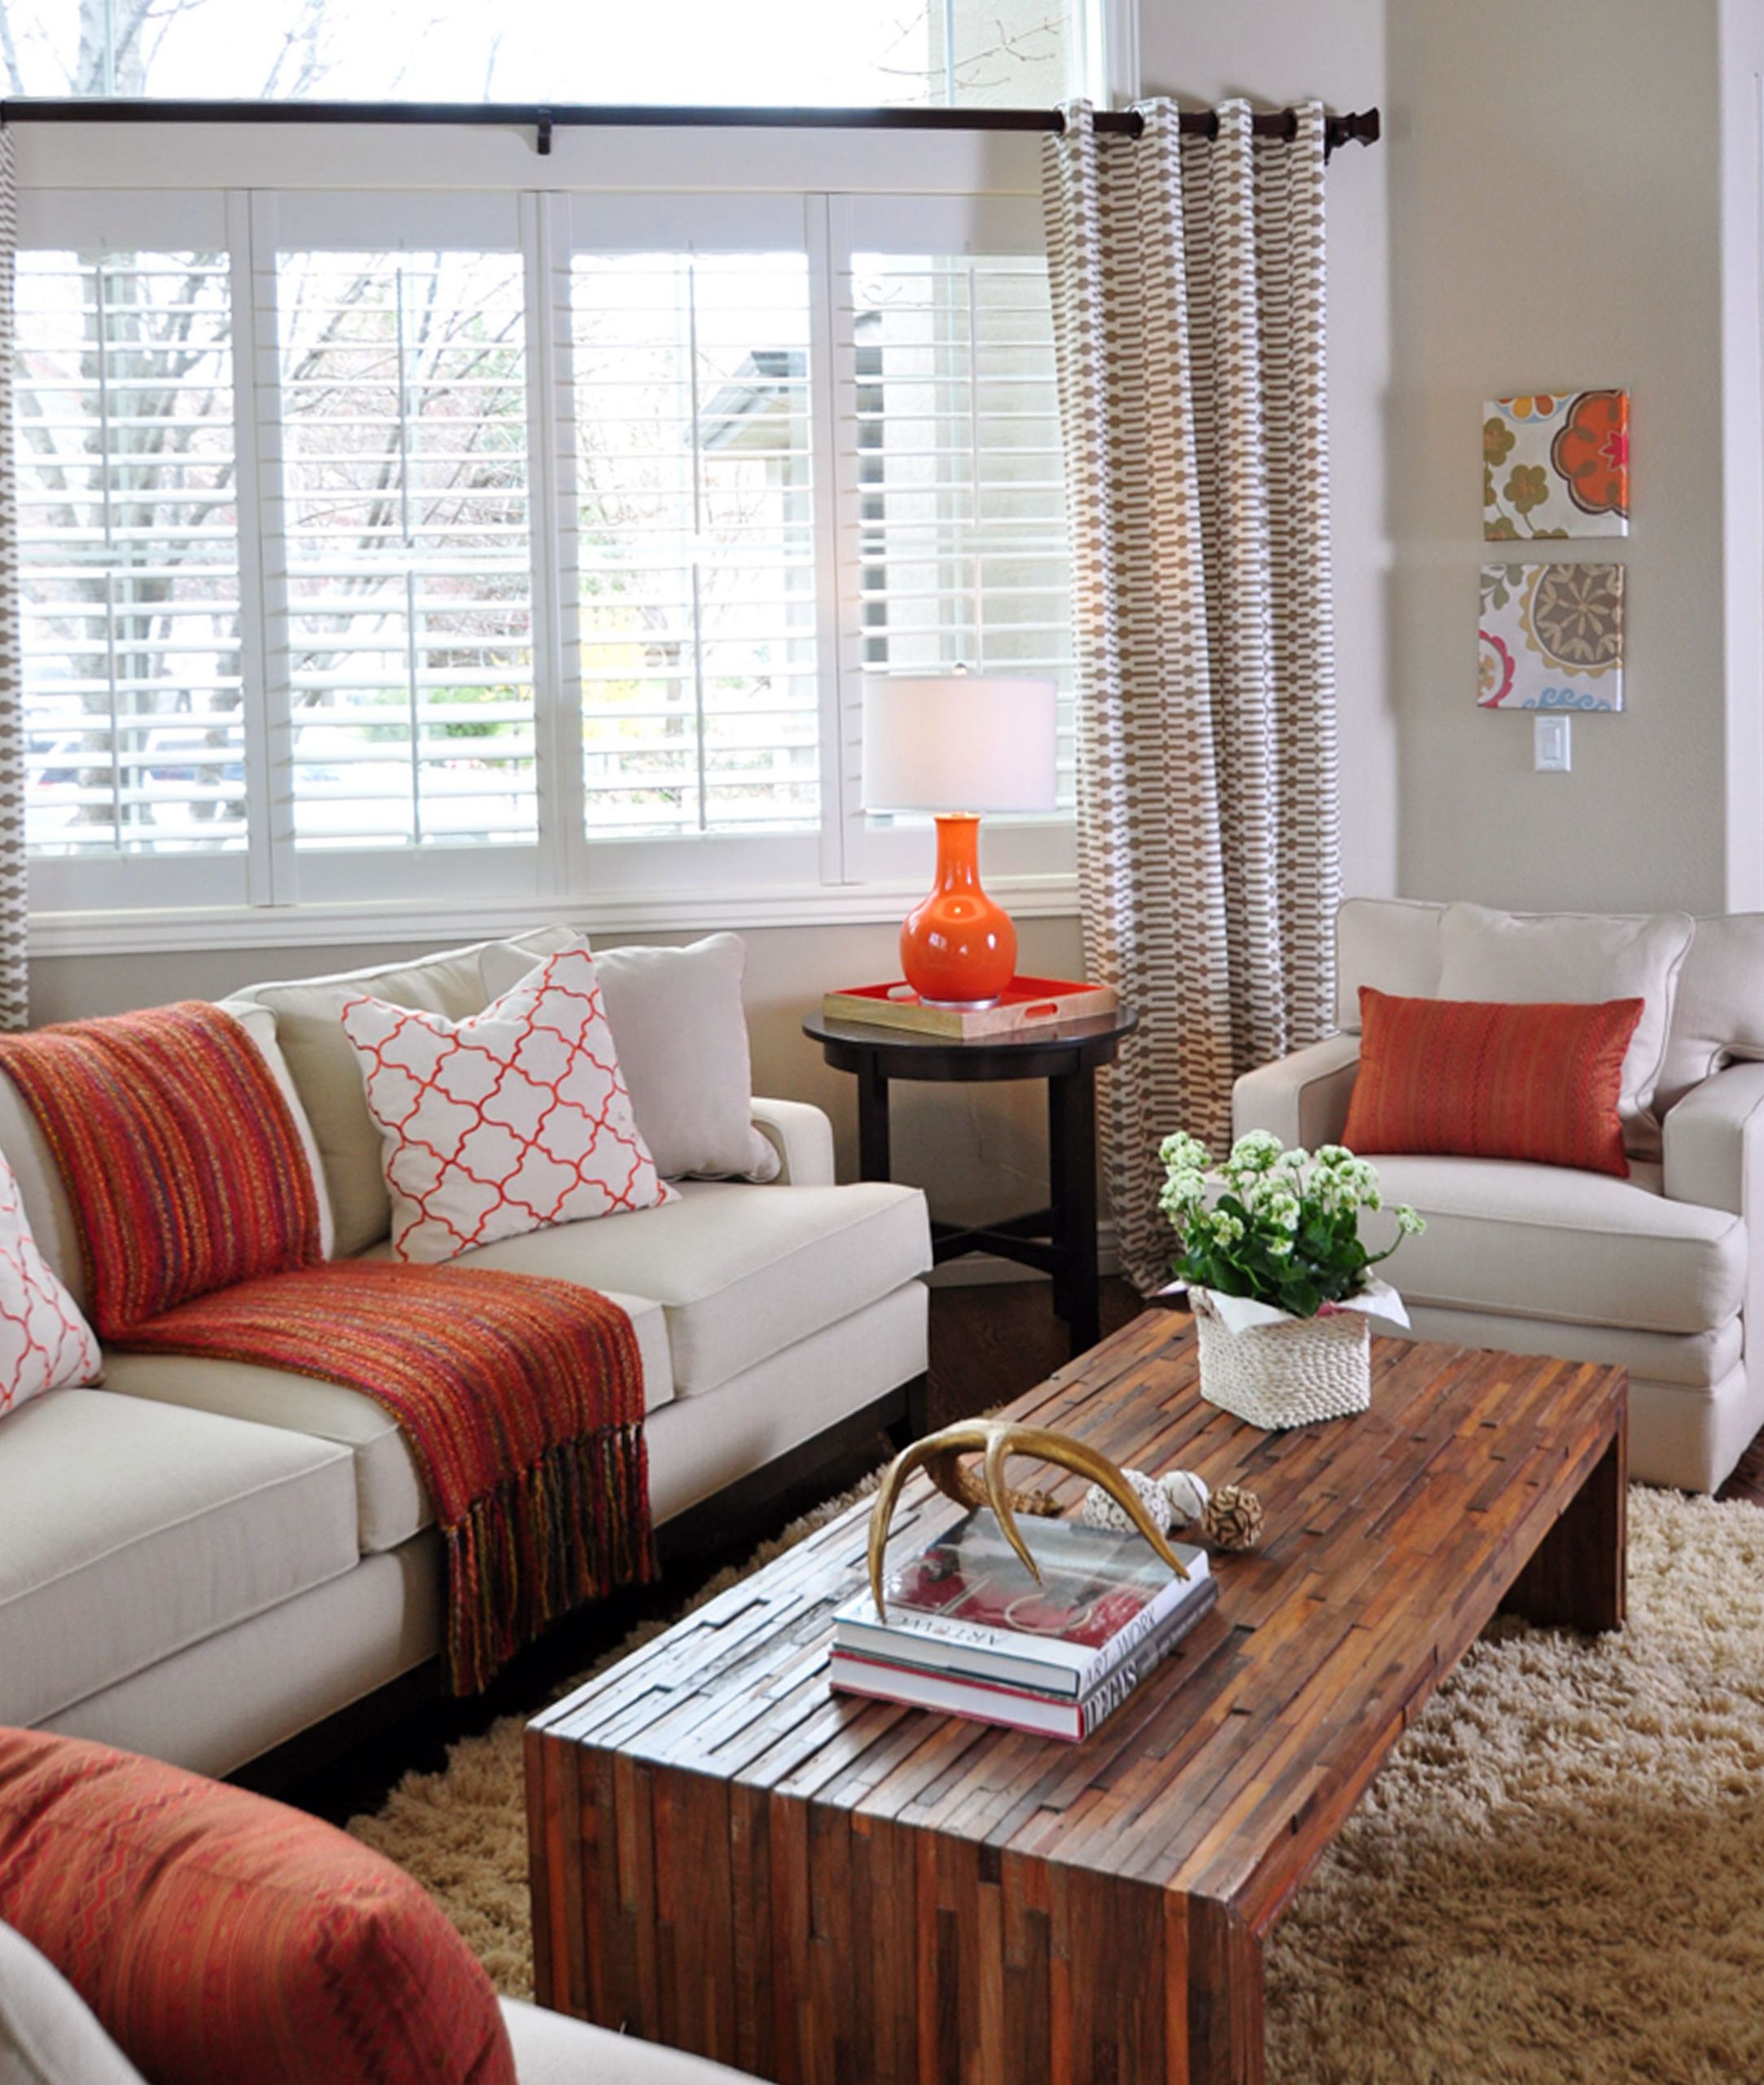 Orange Rugs For Living Room
 orange and taupe living room by Judith Balis shag rug